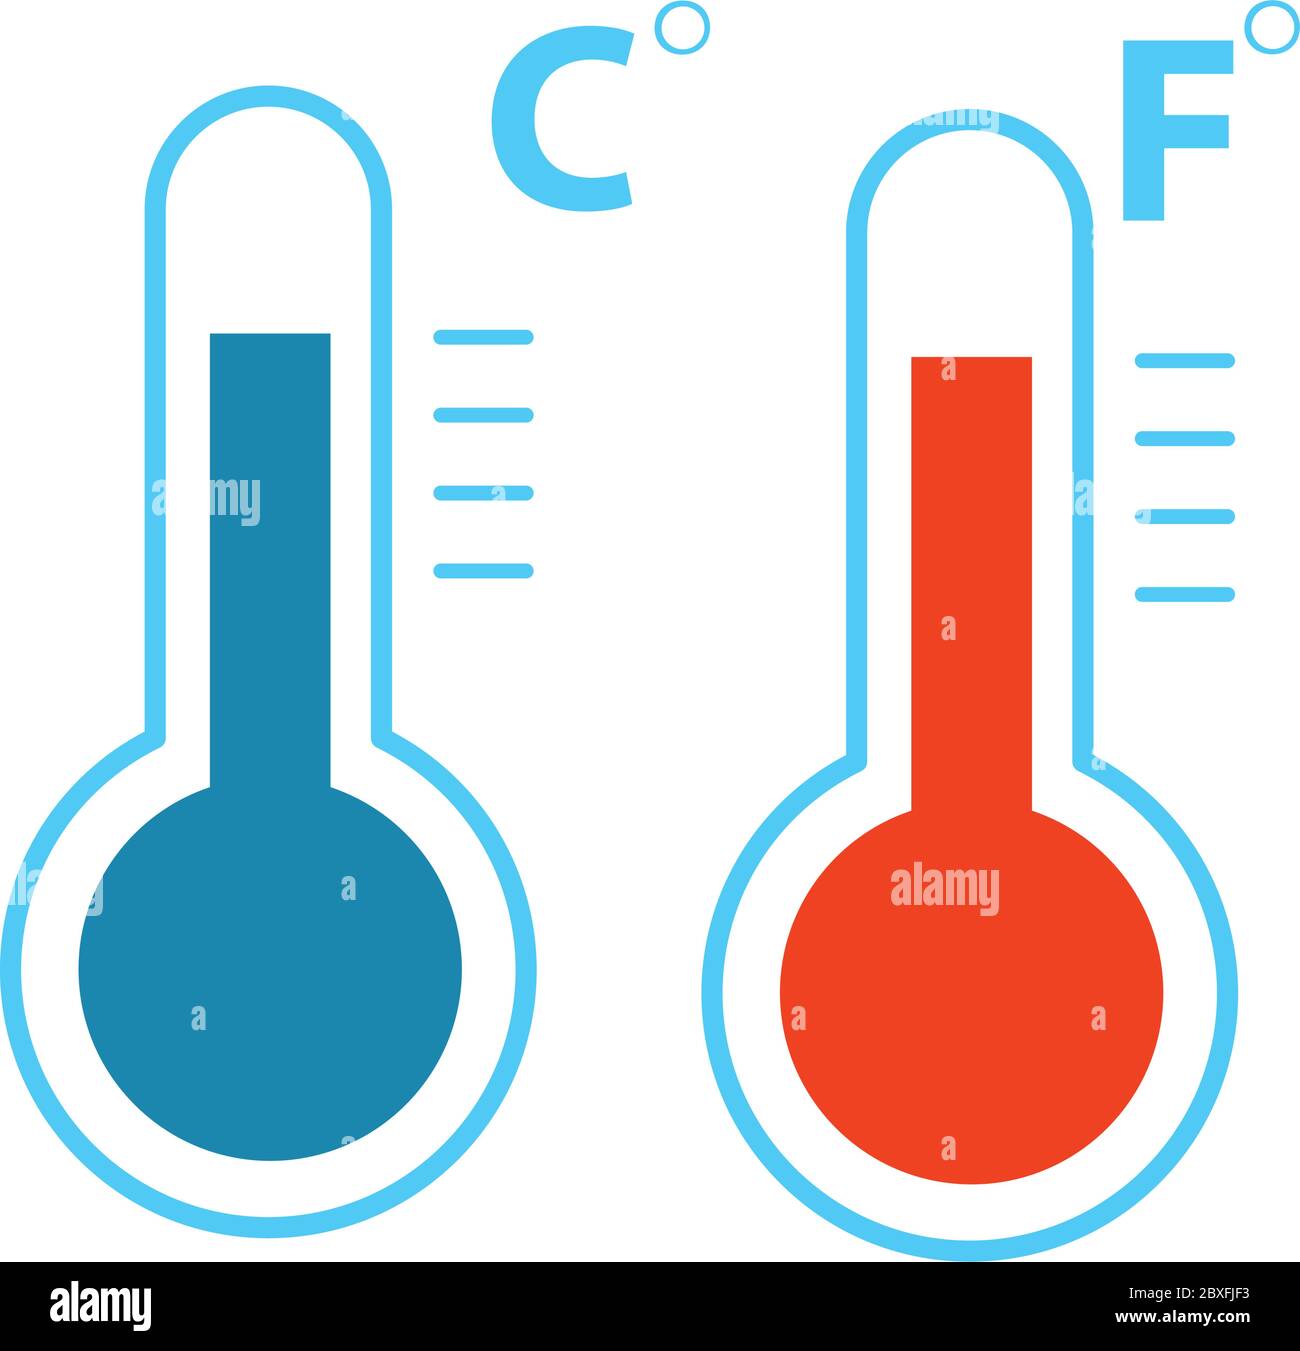 https://c8.alamy.com/comp/2BXFJF3/flat-celsius-and-fahrenheit-thermometers-cold-and-heat-temperature-icon-vector-isolated-eps-10-2BXFJF3.jpg